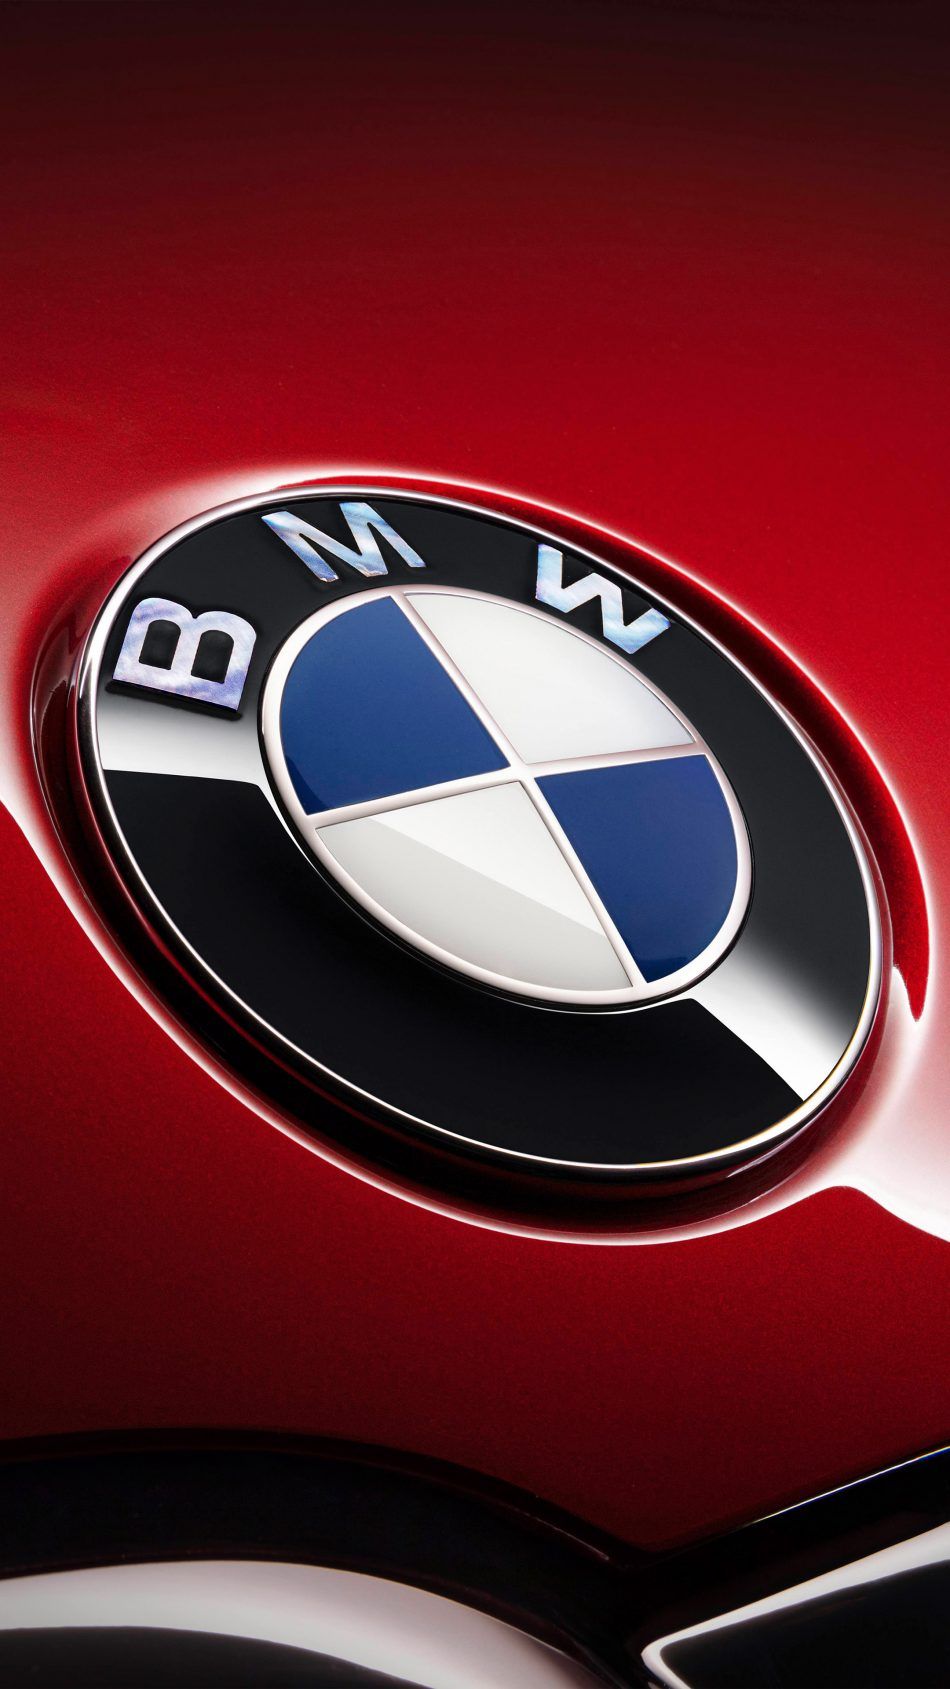 BMW Logo HD Android Wallpapers - Wallpaper Cave